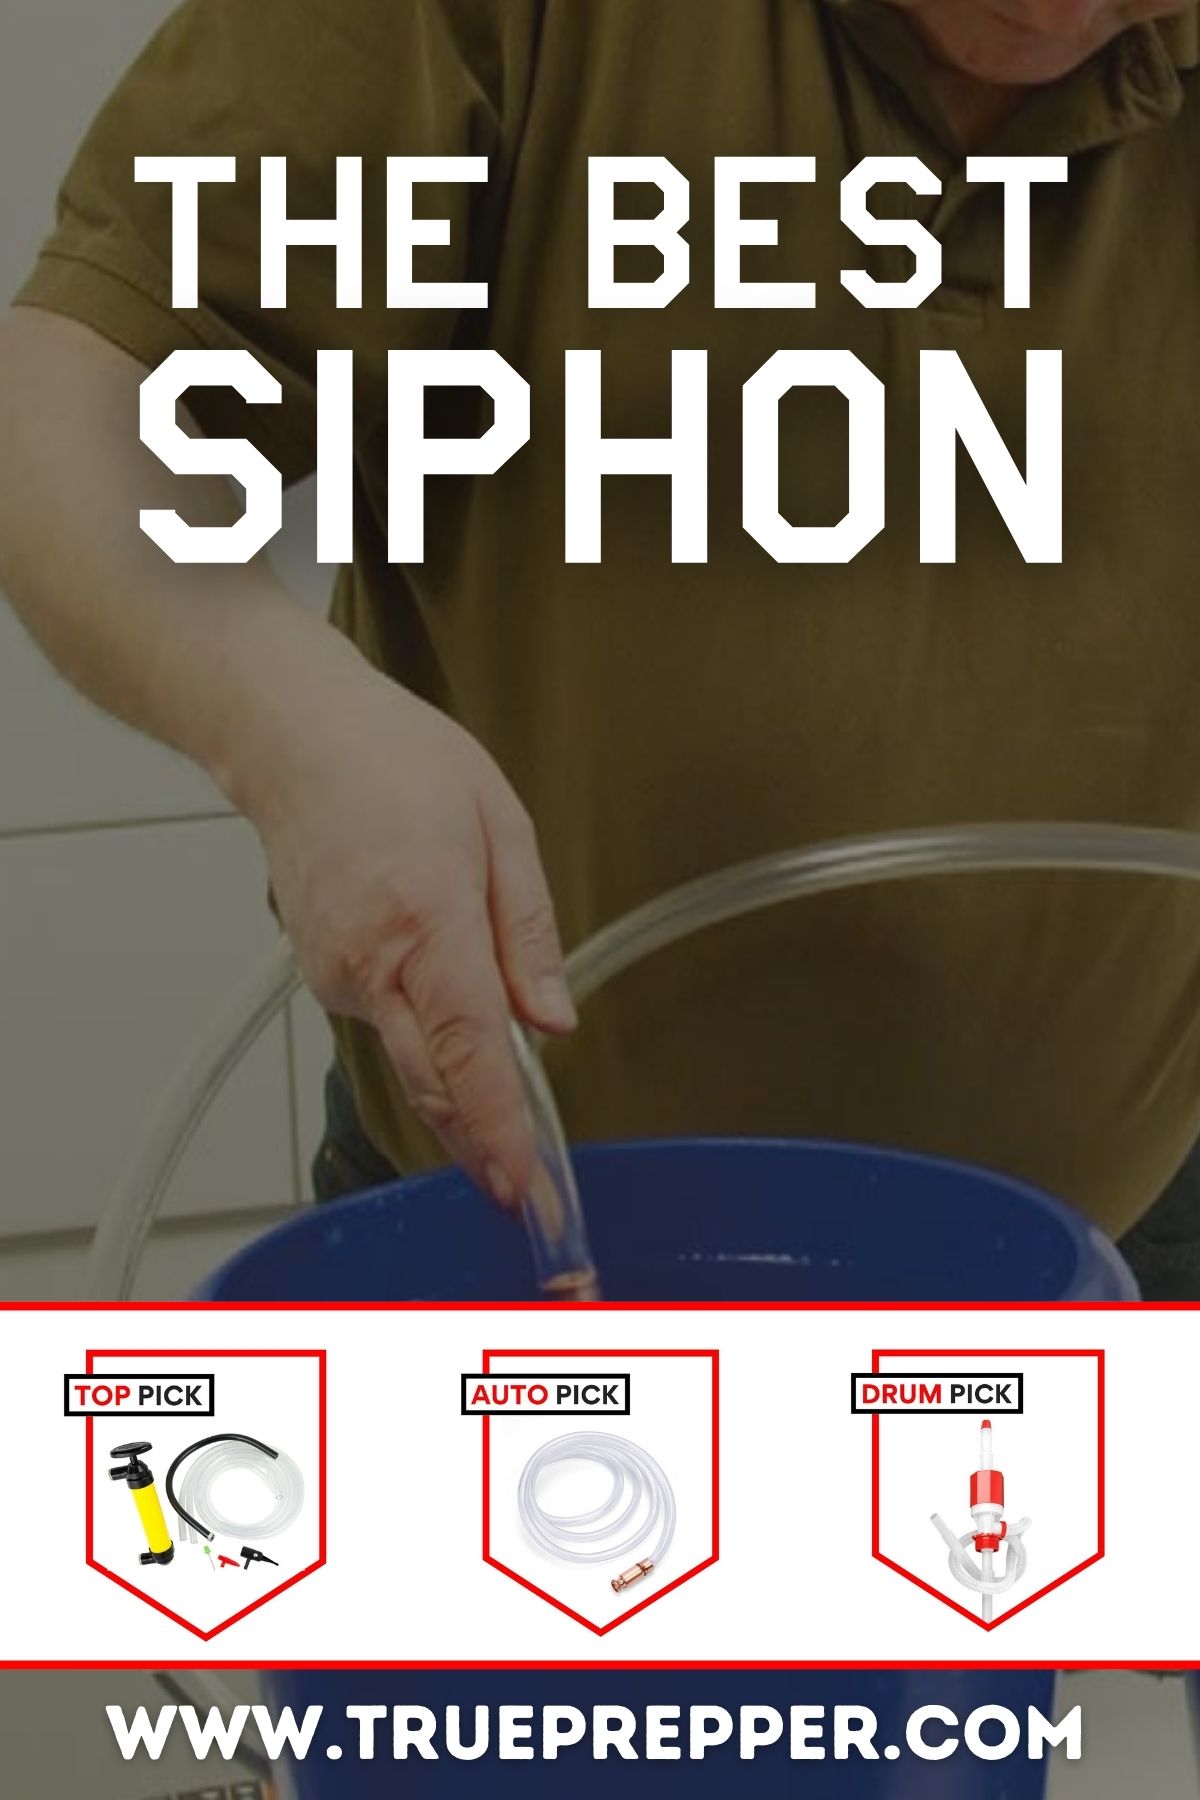 The Best Siphon